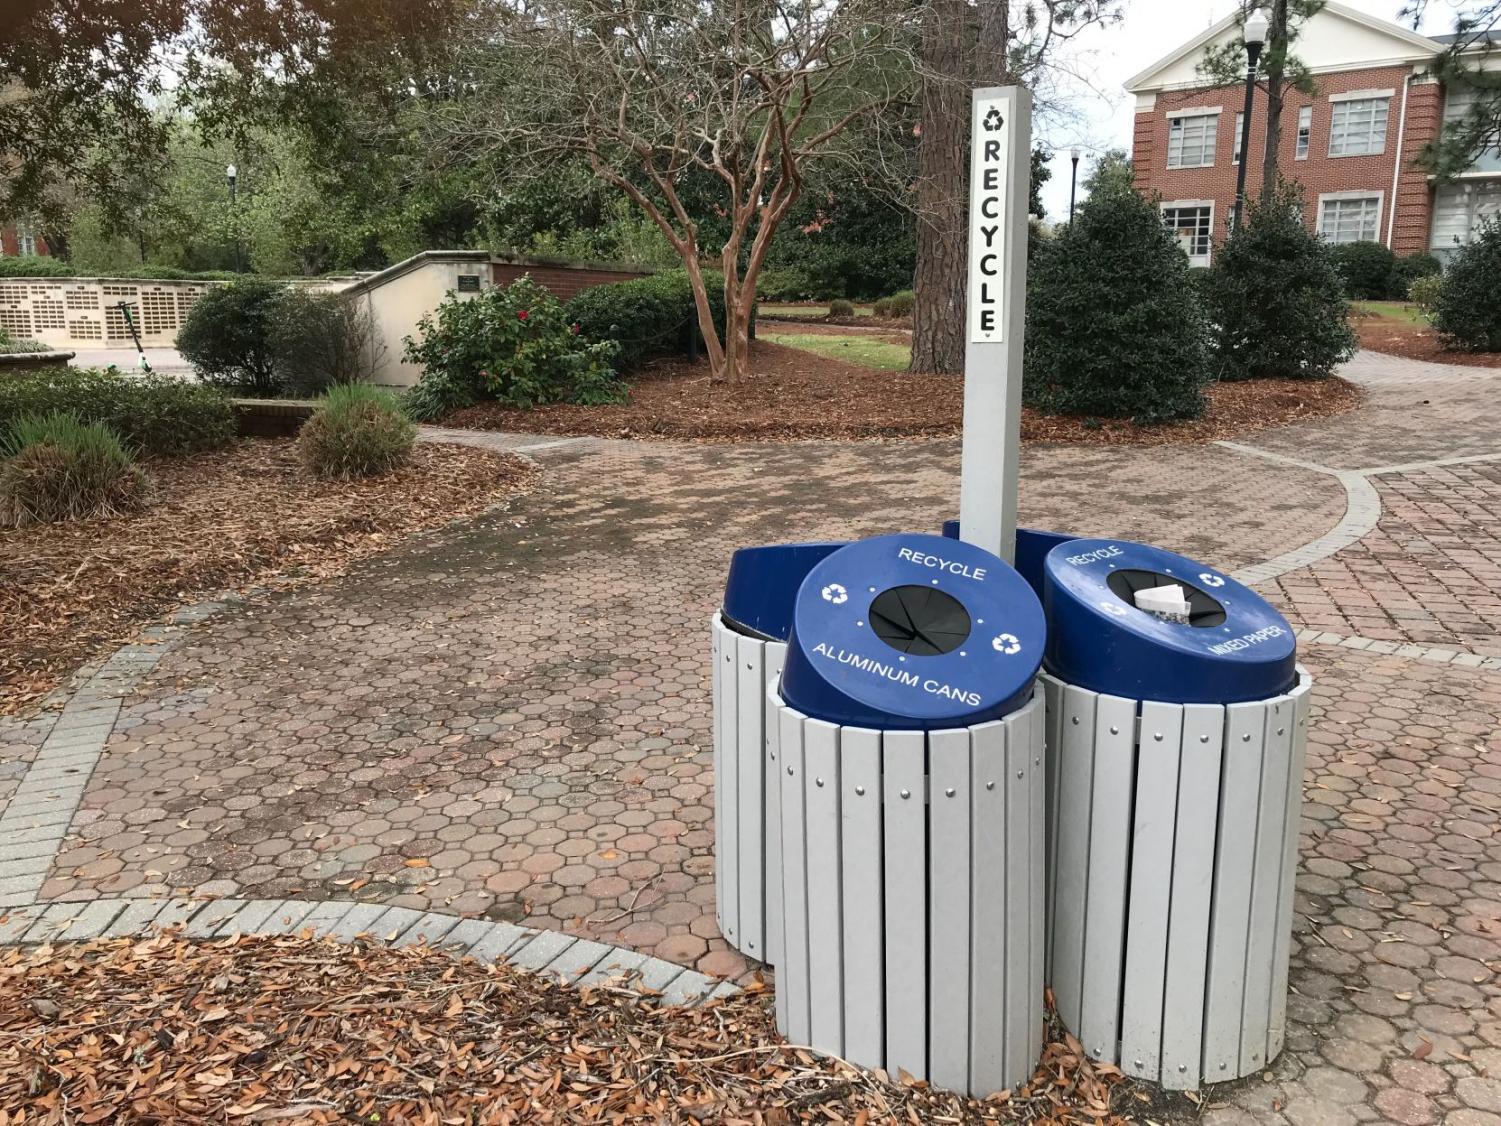 Georgia+Southern+student+pitches+idea+to+SGA+to+implement+more+recycling+and+compost+bins+around+campus